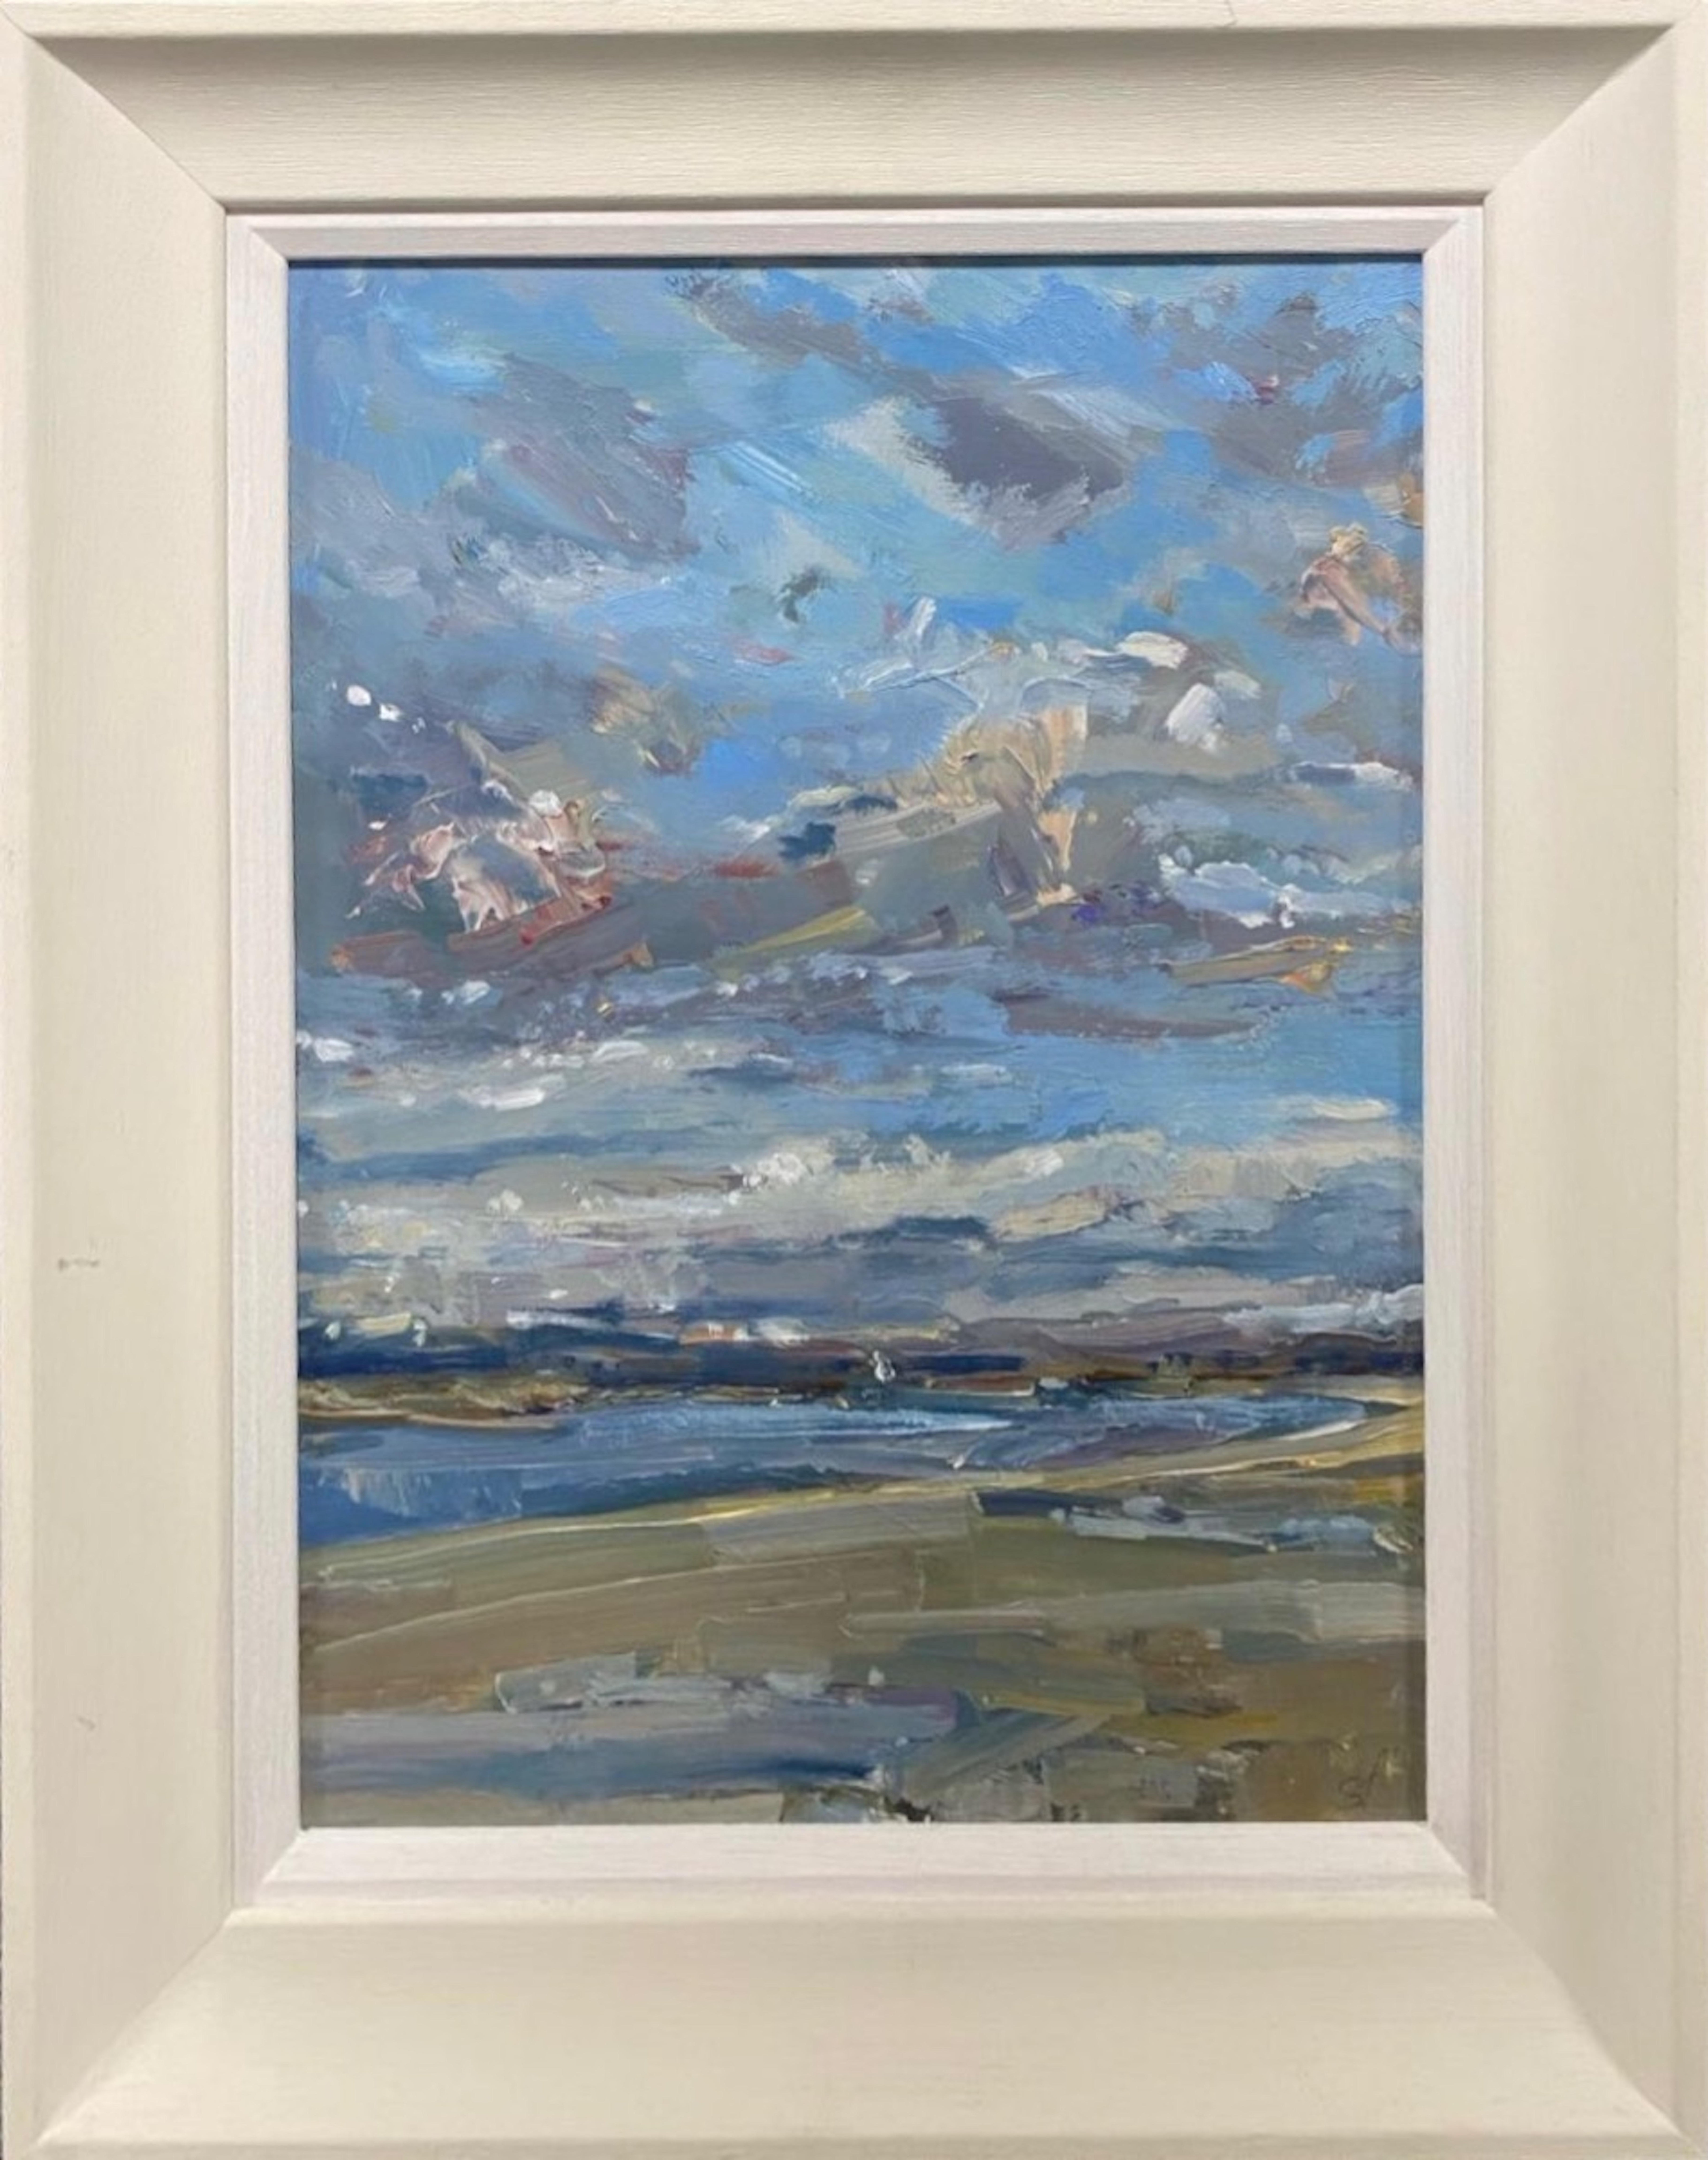 Sunset coming is an original landscape painting by Stephen Kinder. The painting has a strong gestural composition and loose brushwork, which heightens the changing light, and tide.

Additional information:

Original

Signed by artist

Oil on